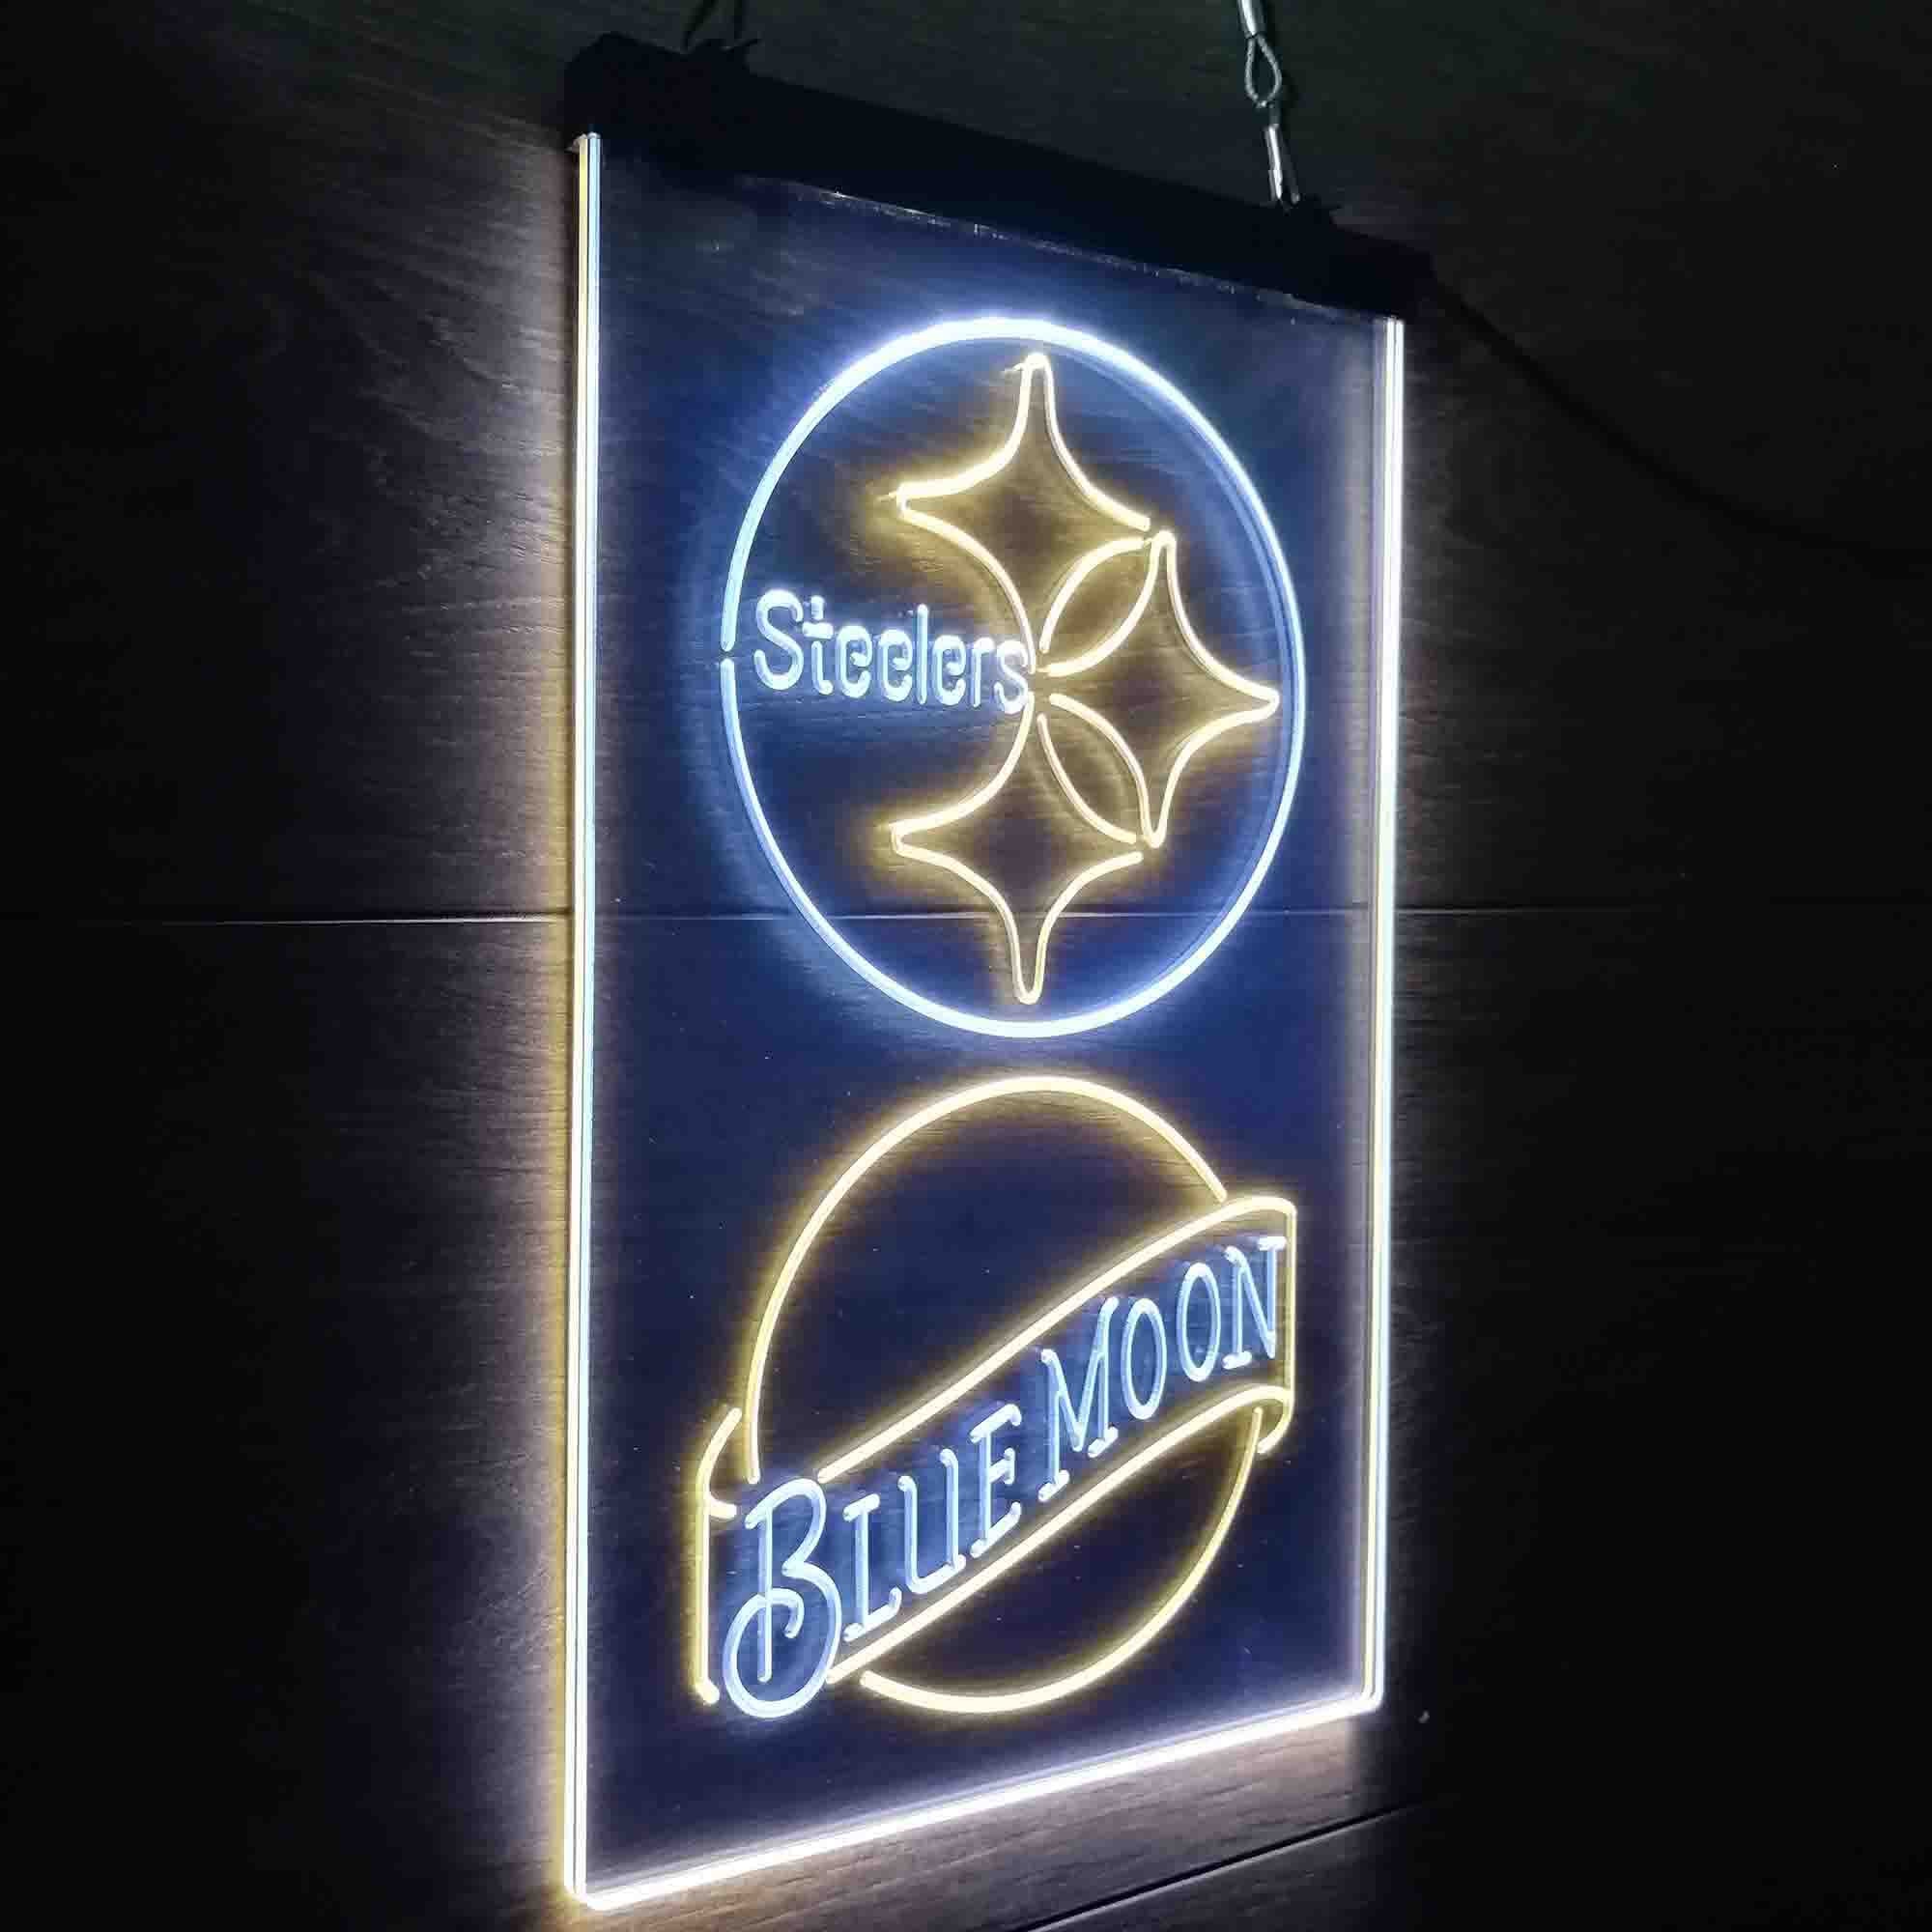 Blue Moon Bar Pittsburgh Steelers Est. 1933 LED Neon Sign